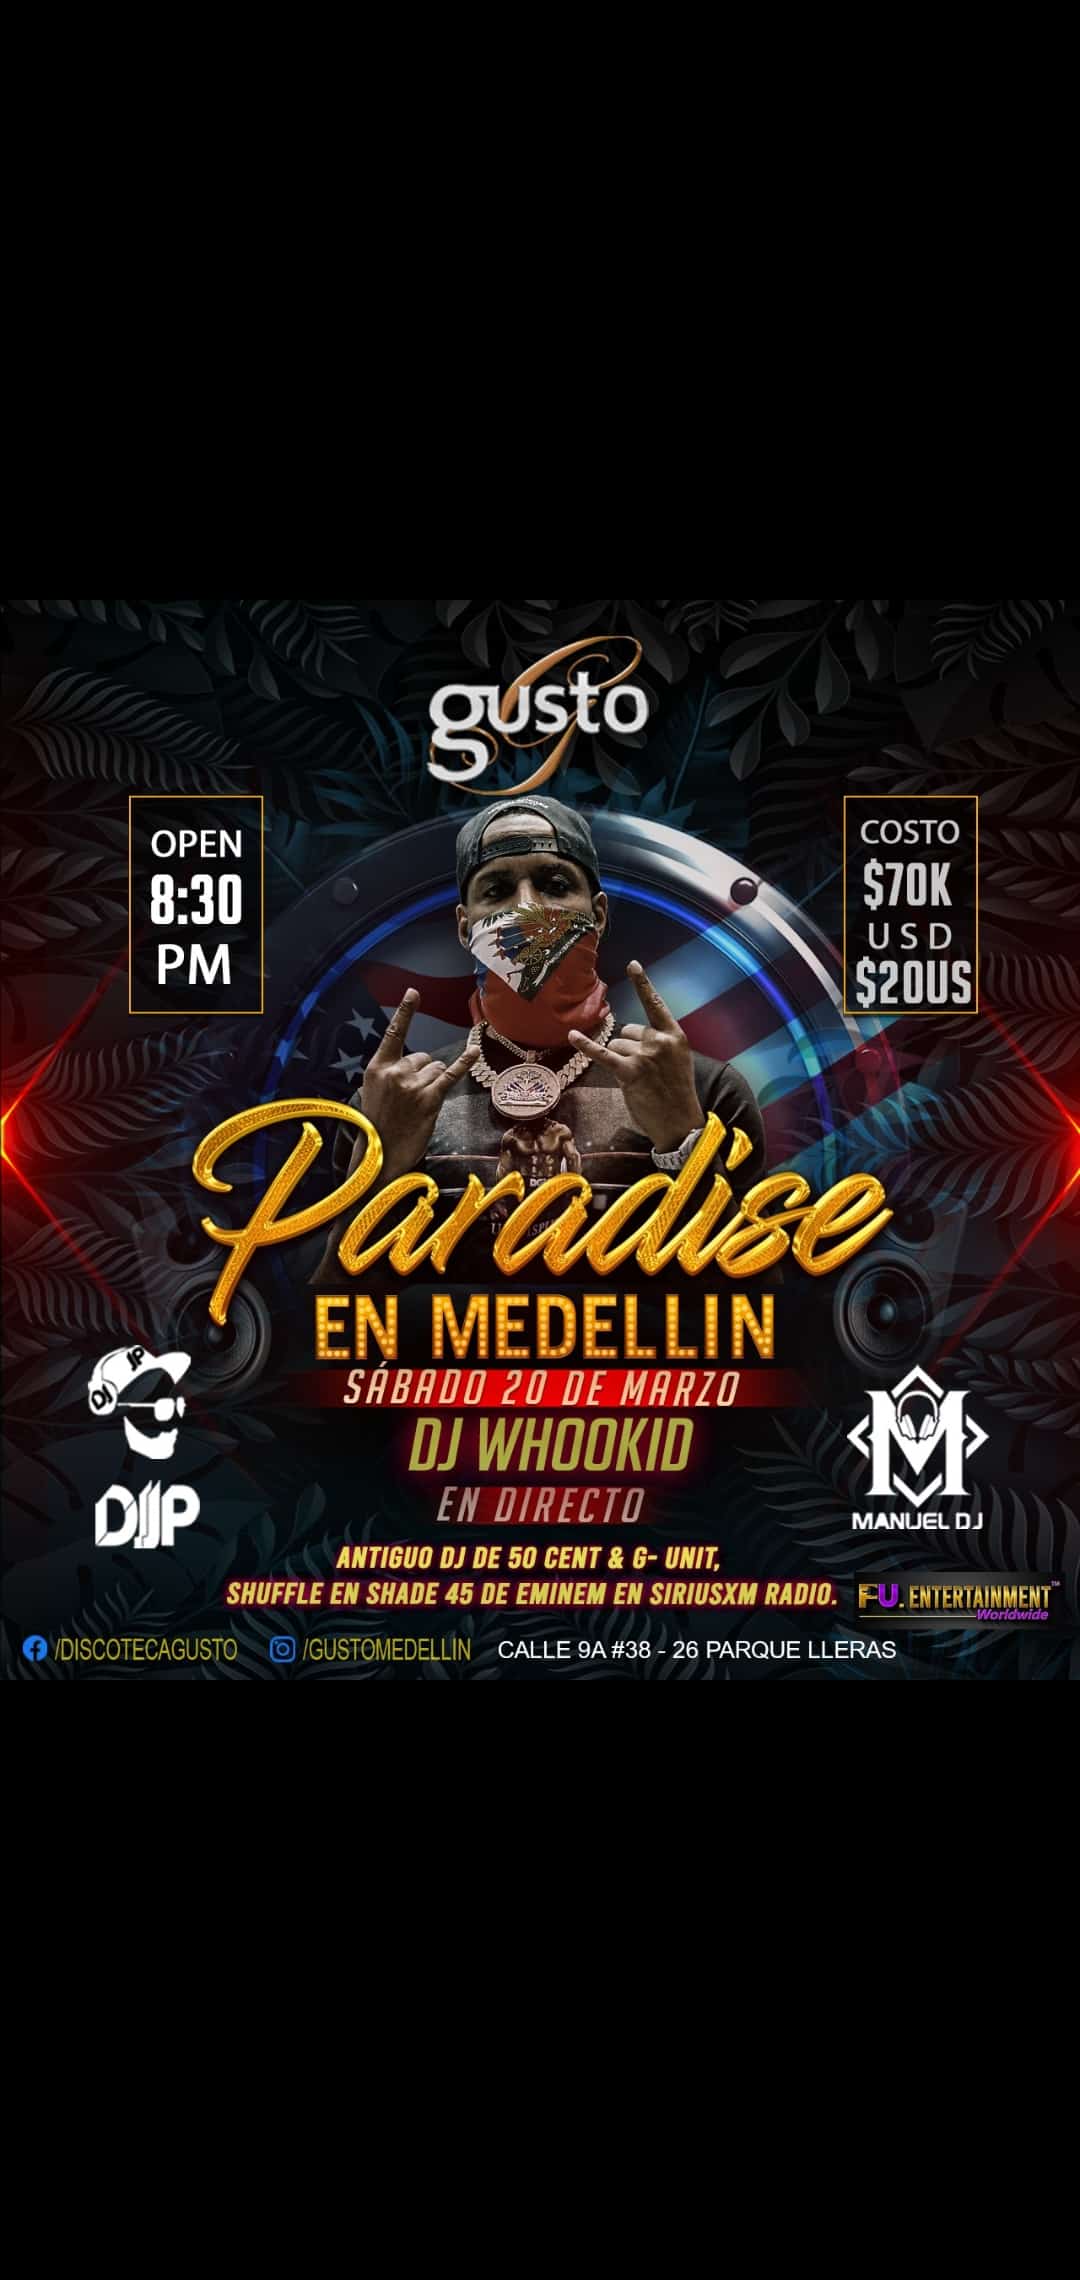 Gusto’s night club in Medellin, Colombia, the safest club in town